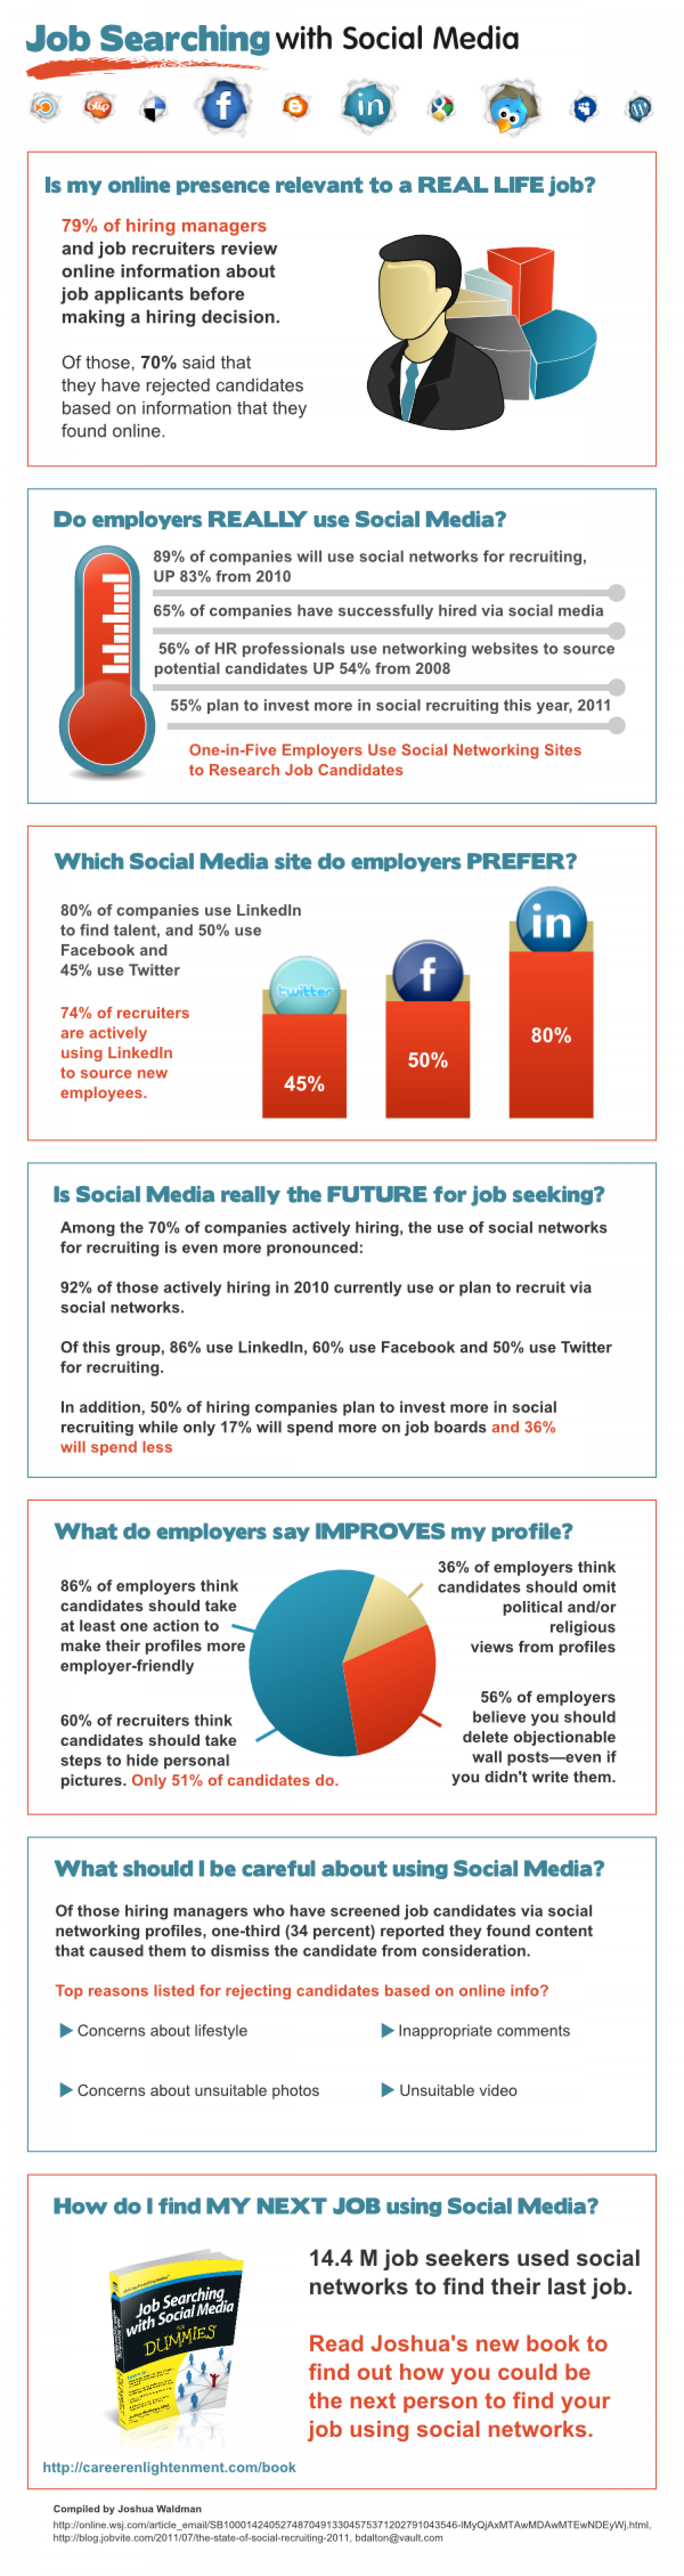 Job searching with Social Media statistics Infographic